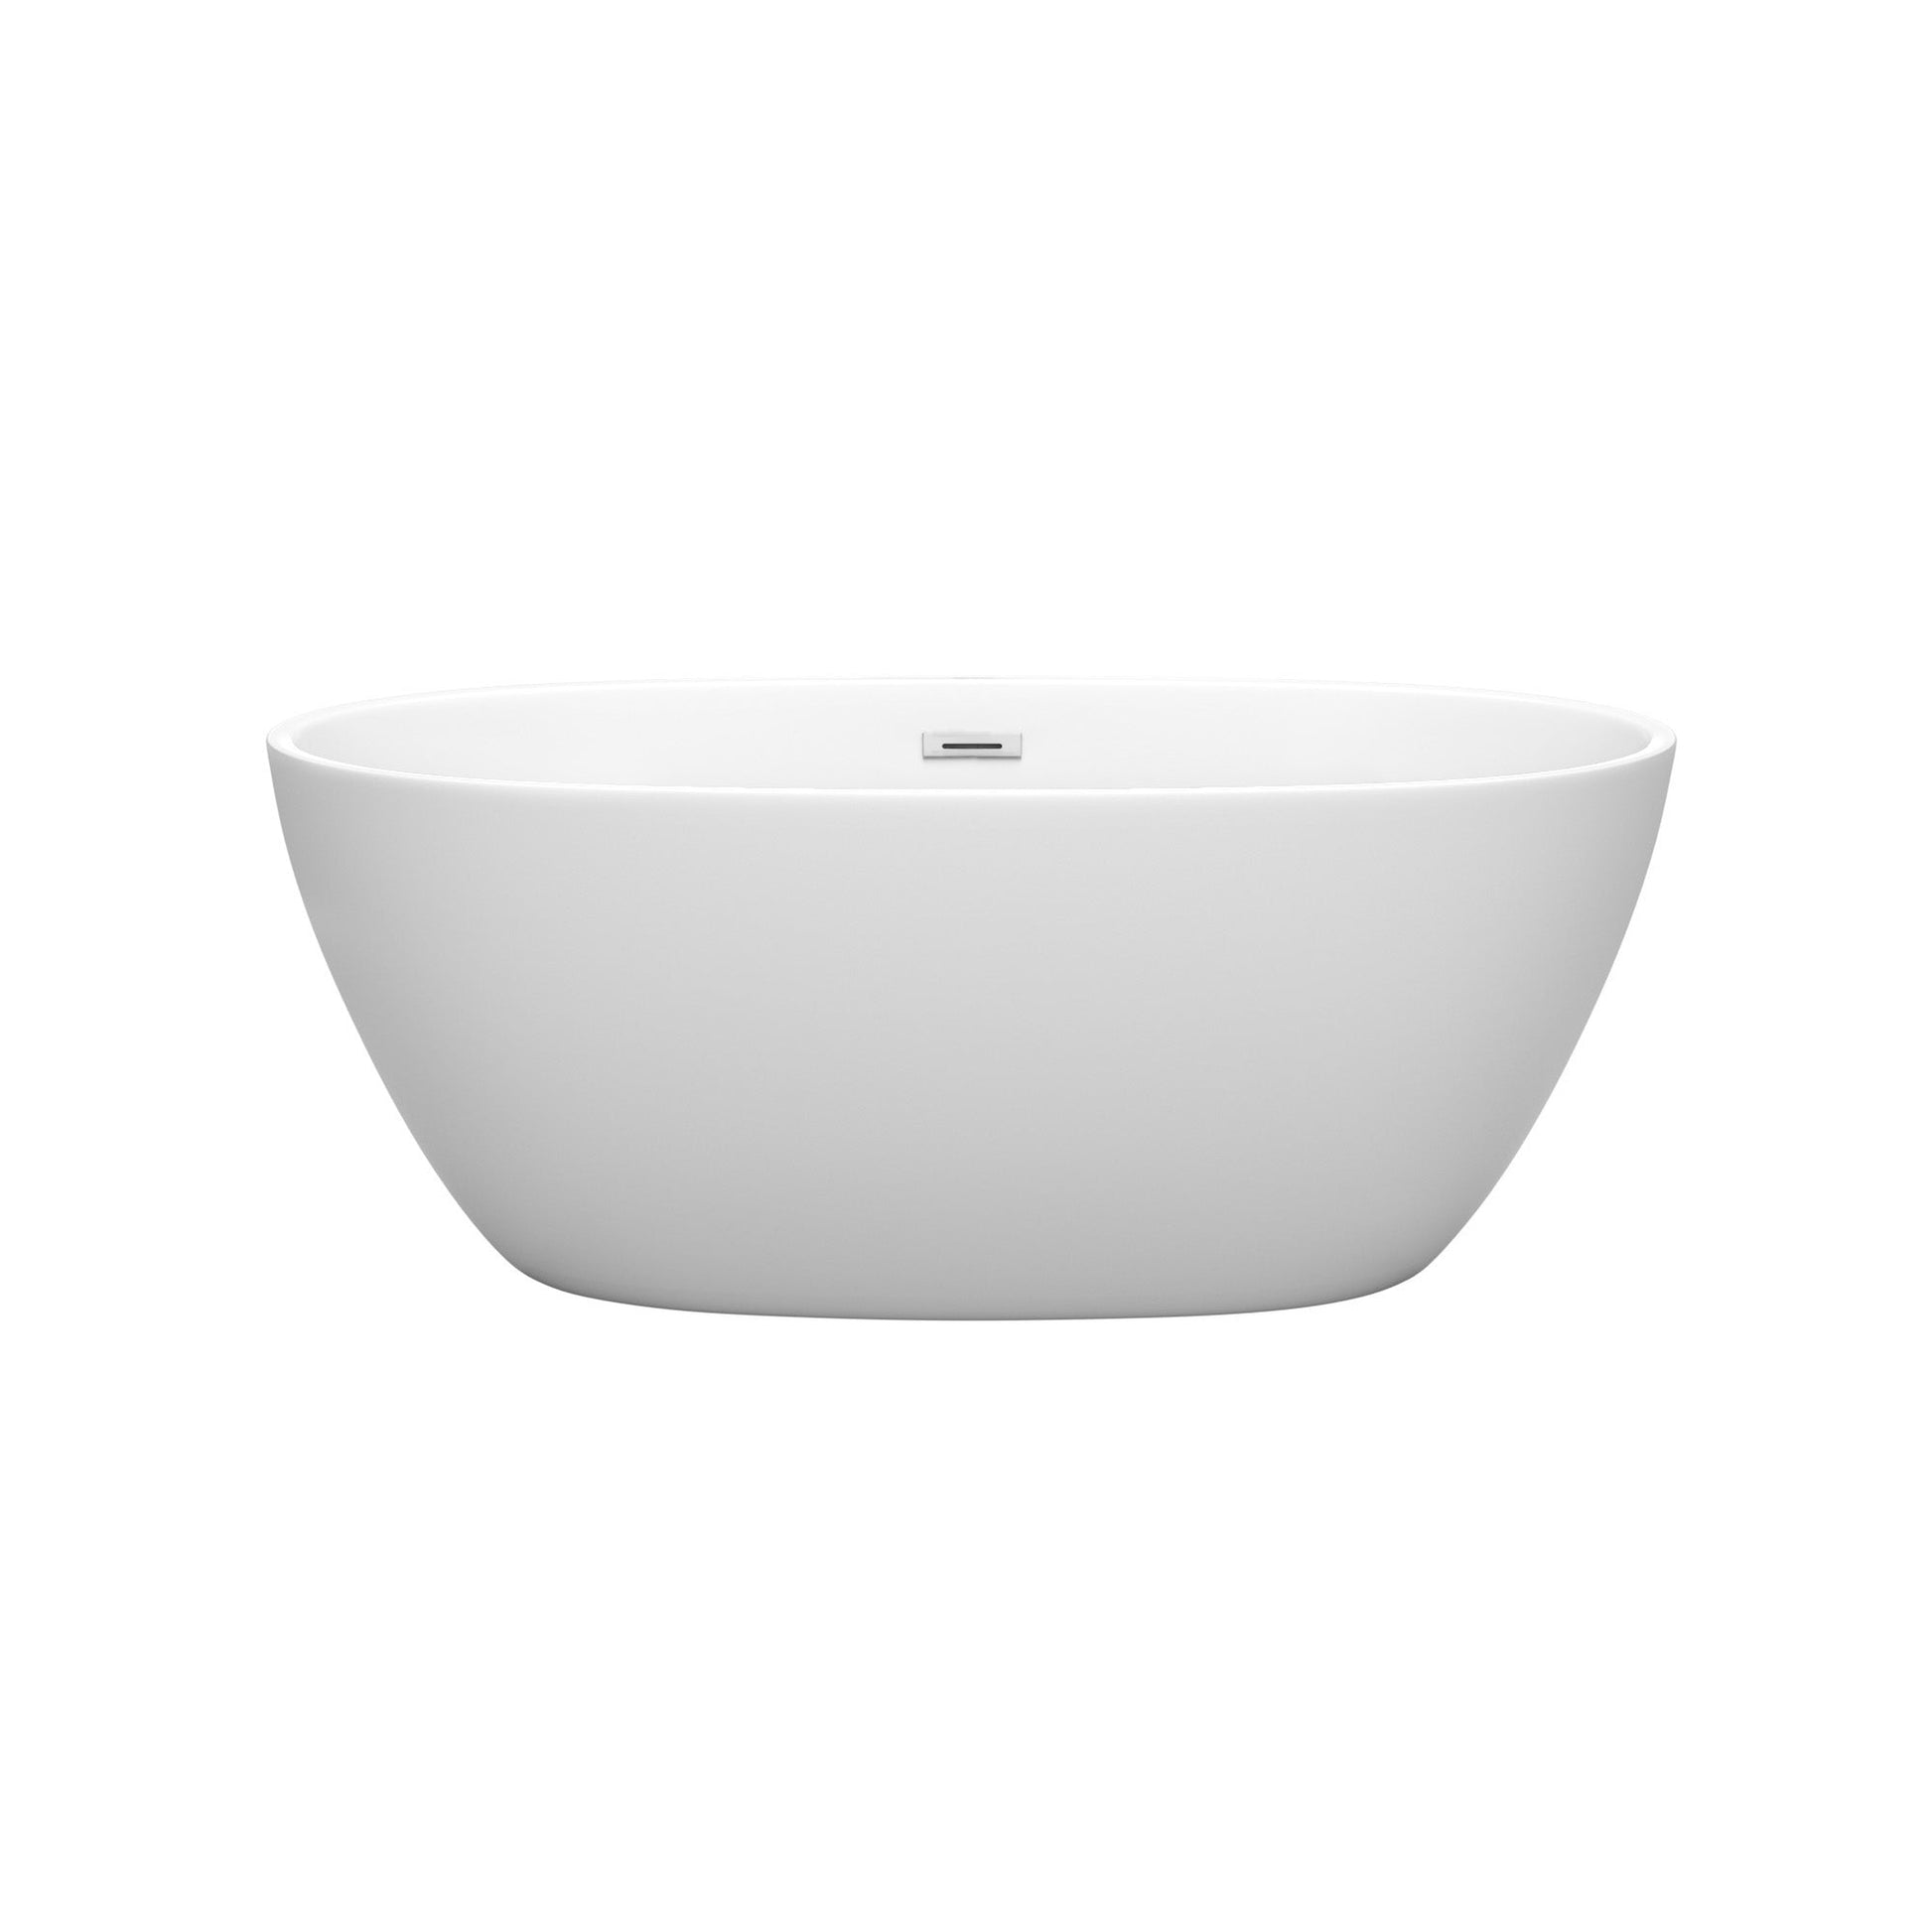 Wyndham Collection Juno 59" Freestanding Bathtub in Matte White With Polished Chrome Drain and Overflow Trim